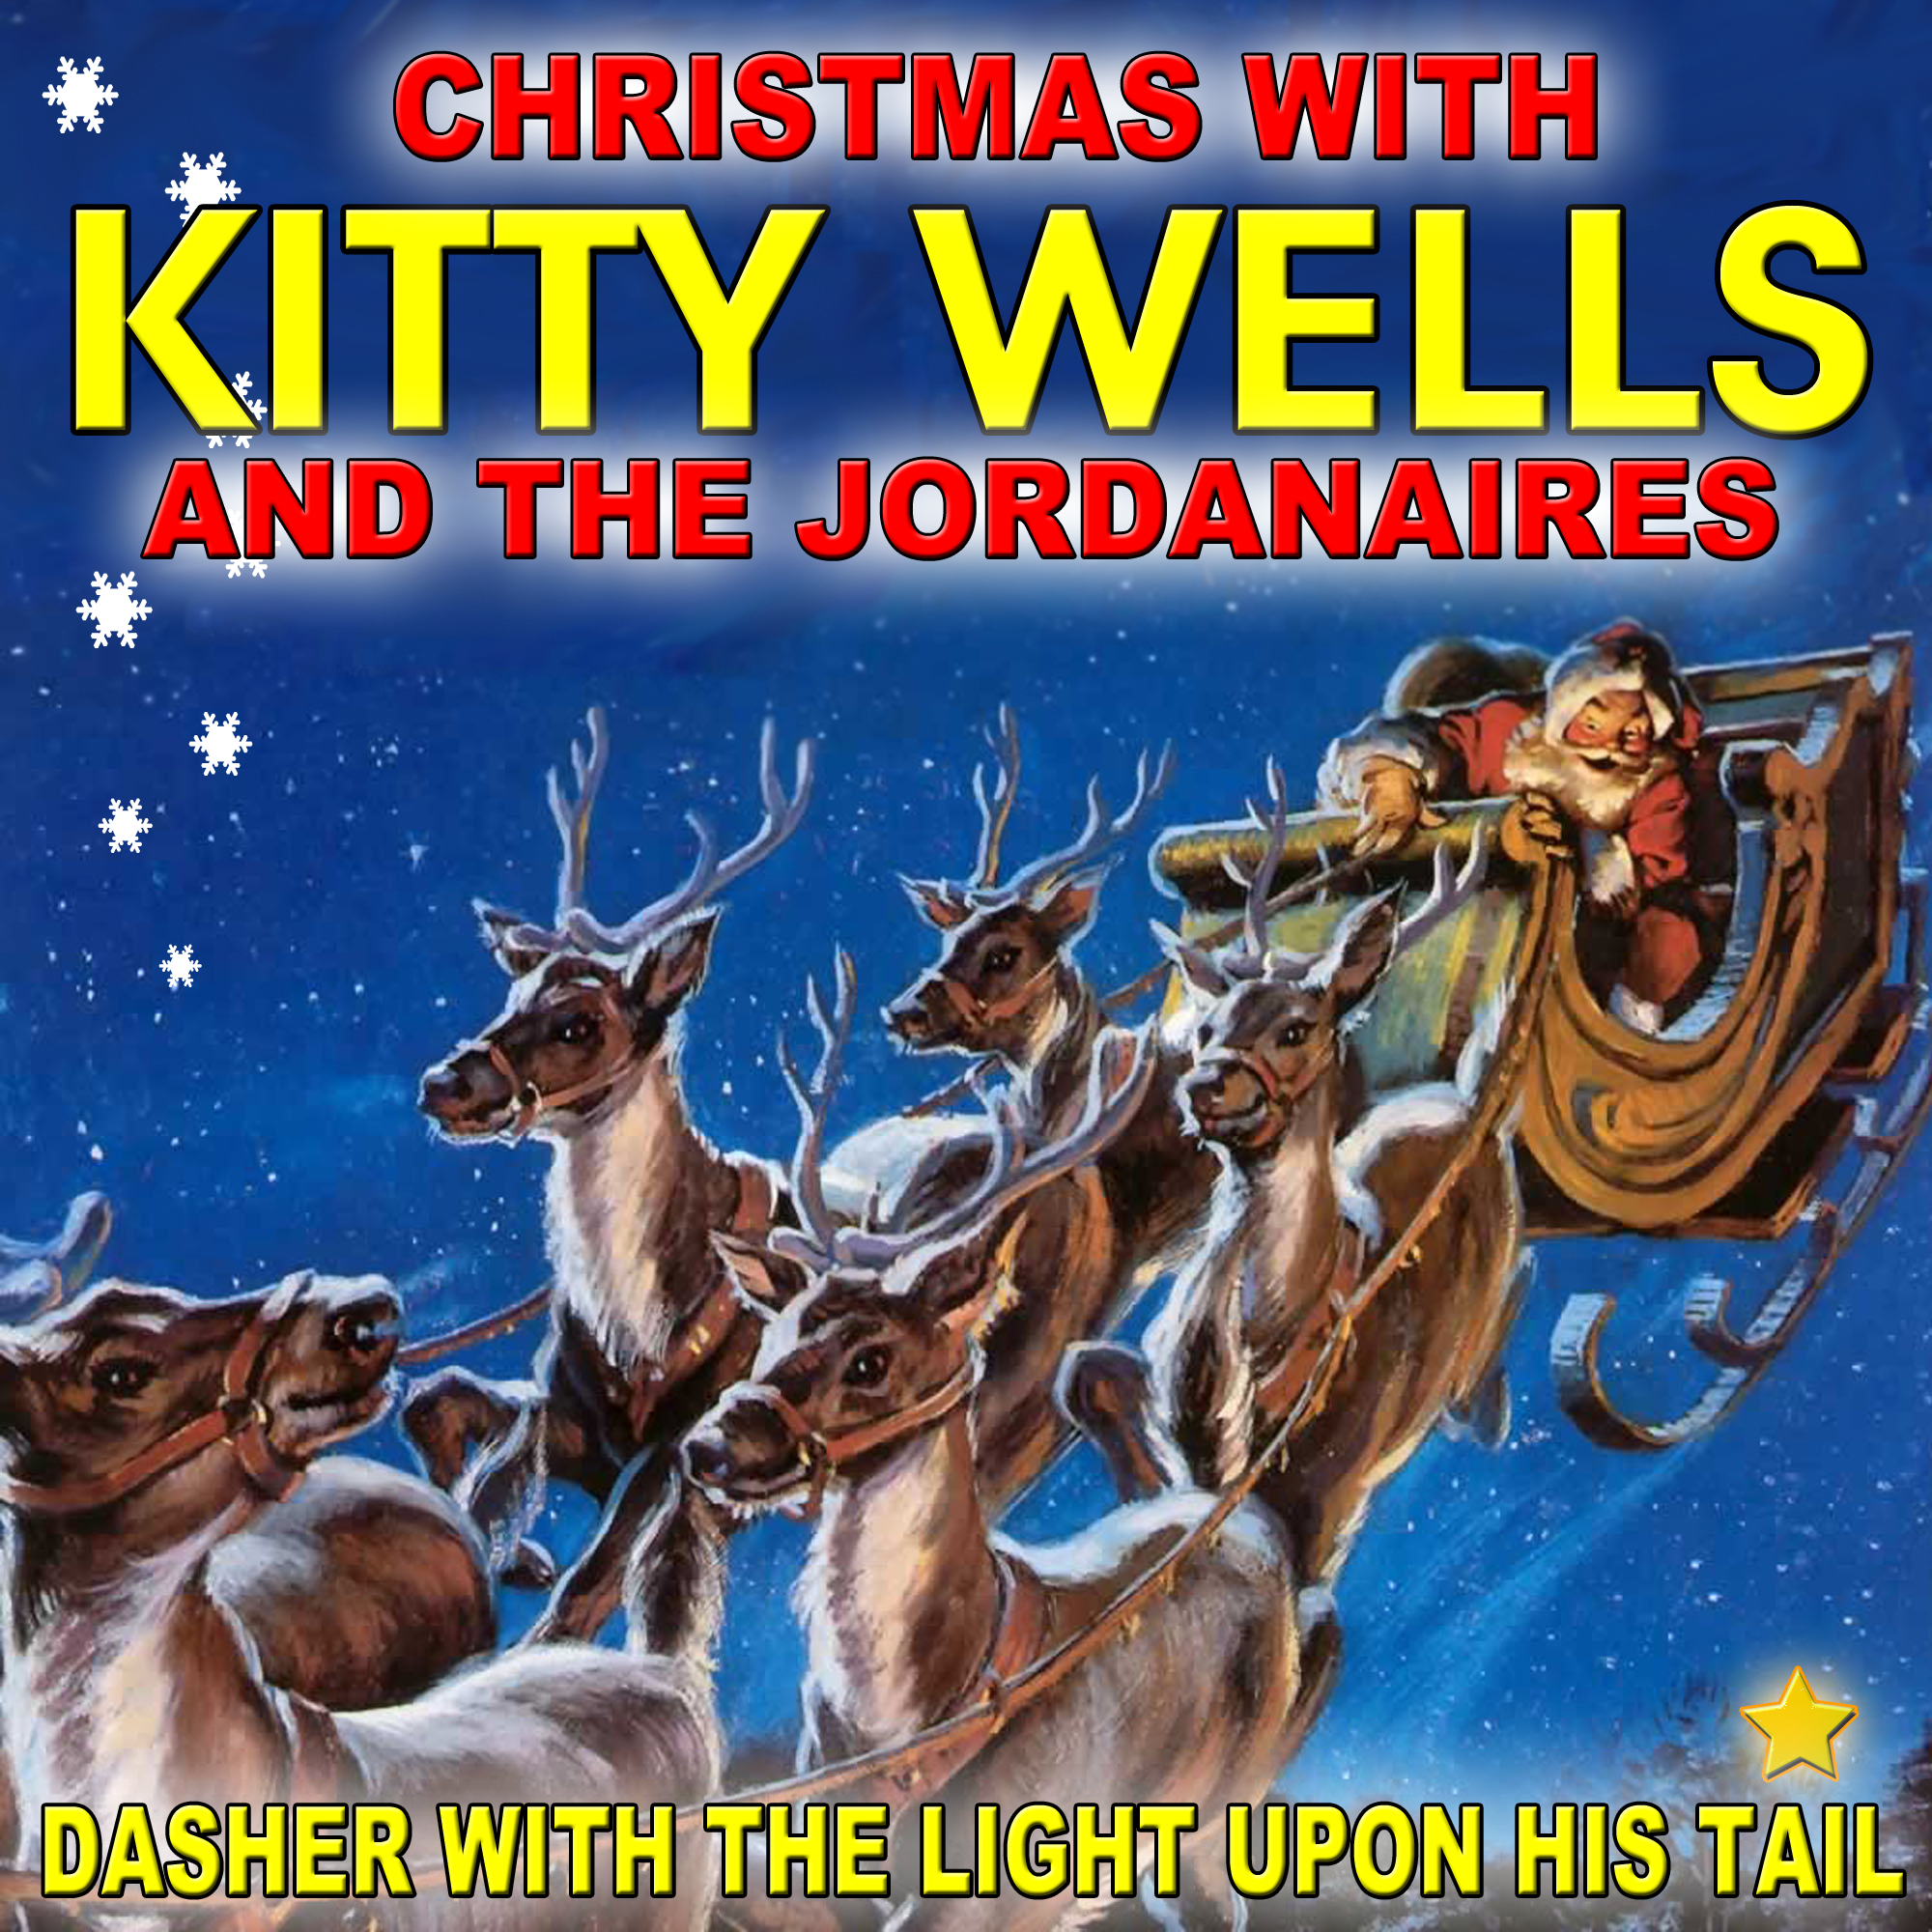 Dasher With the Light Upon His Tail: Christmas With Kitty Wells